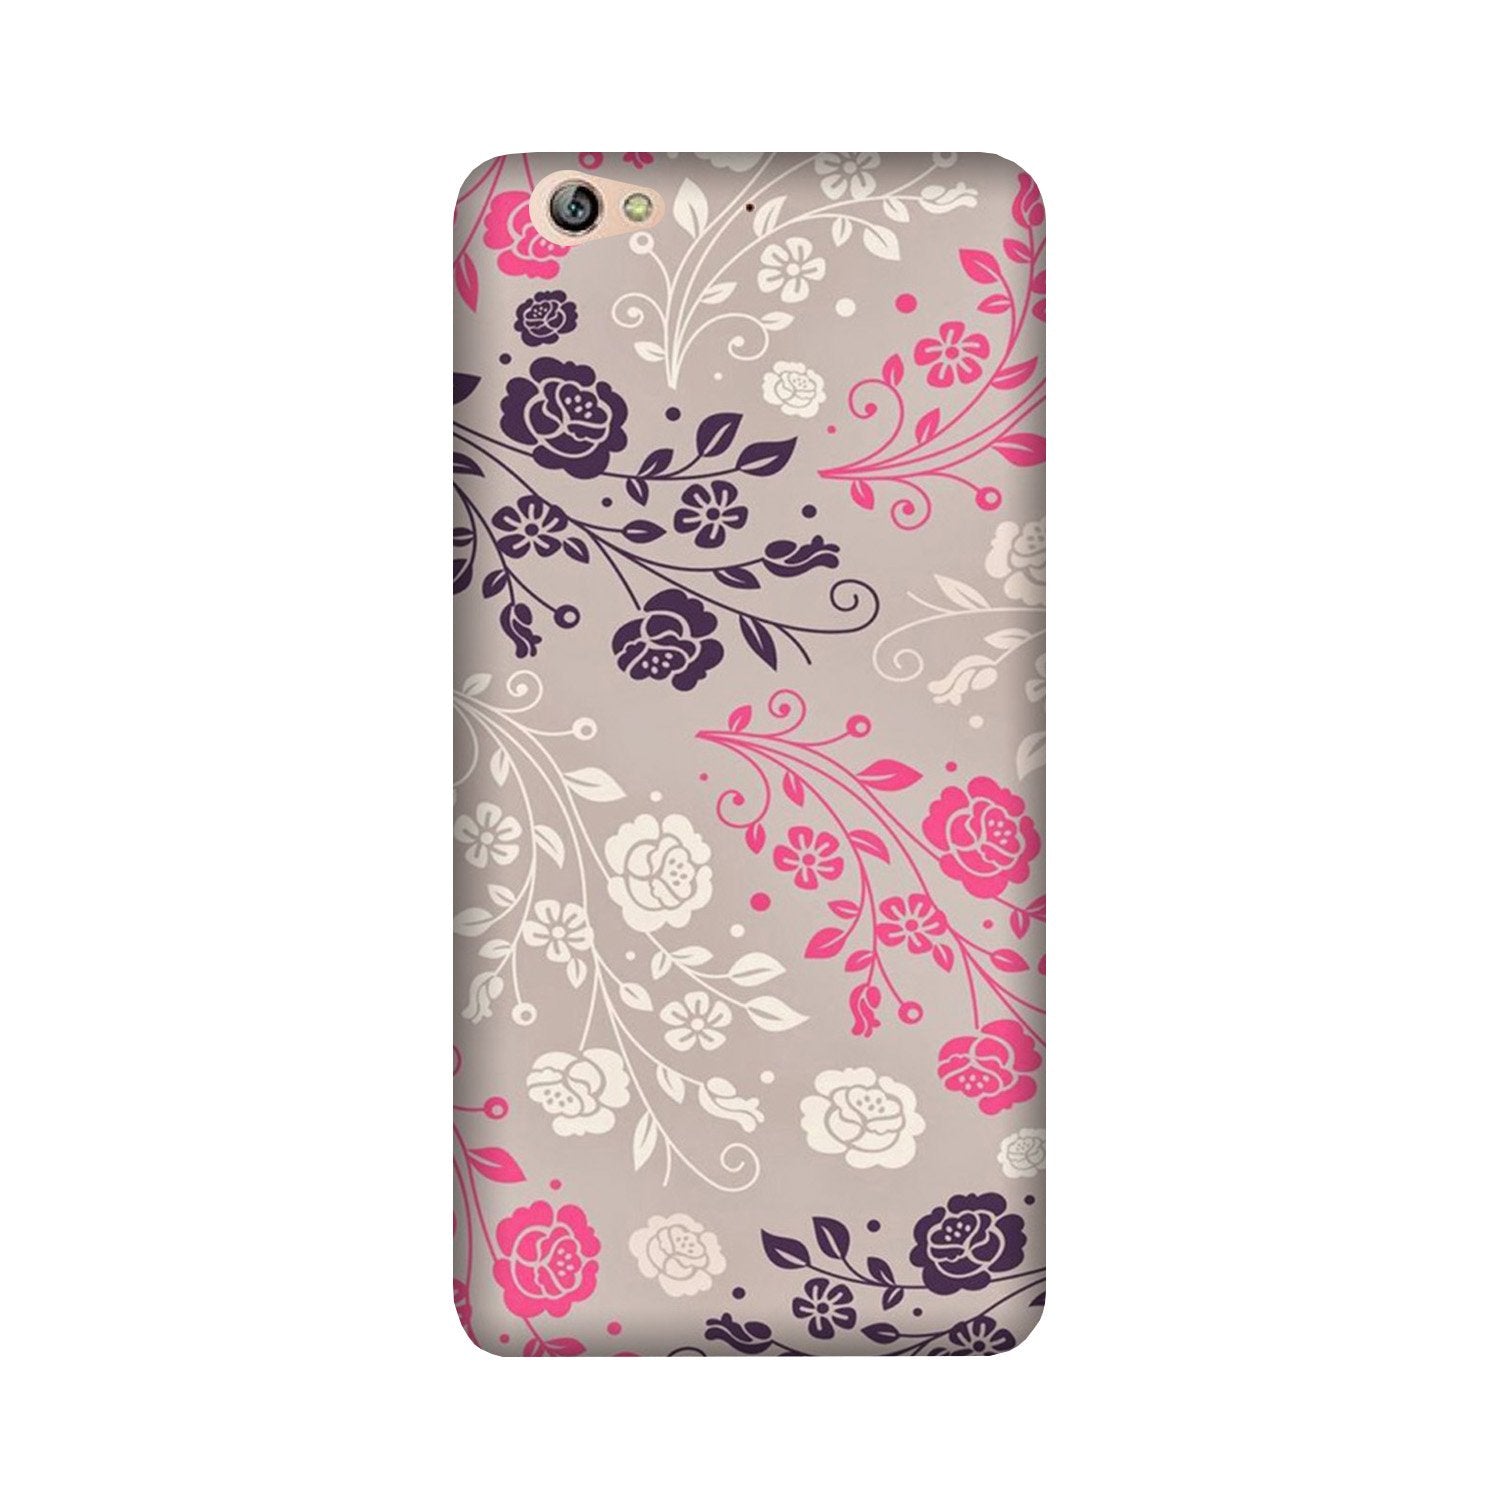 Pattern2 Case for Gionee S6